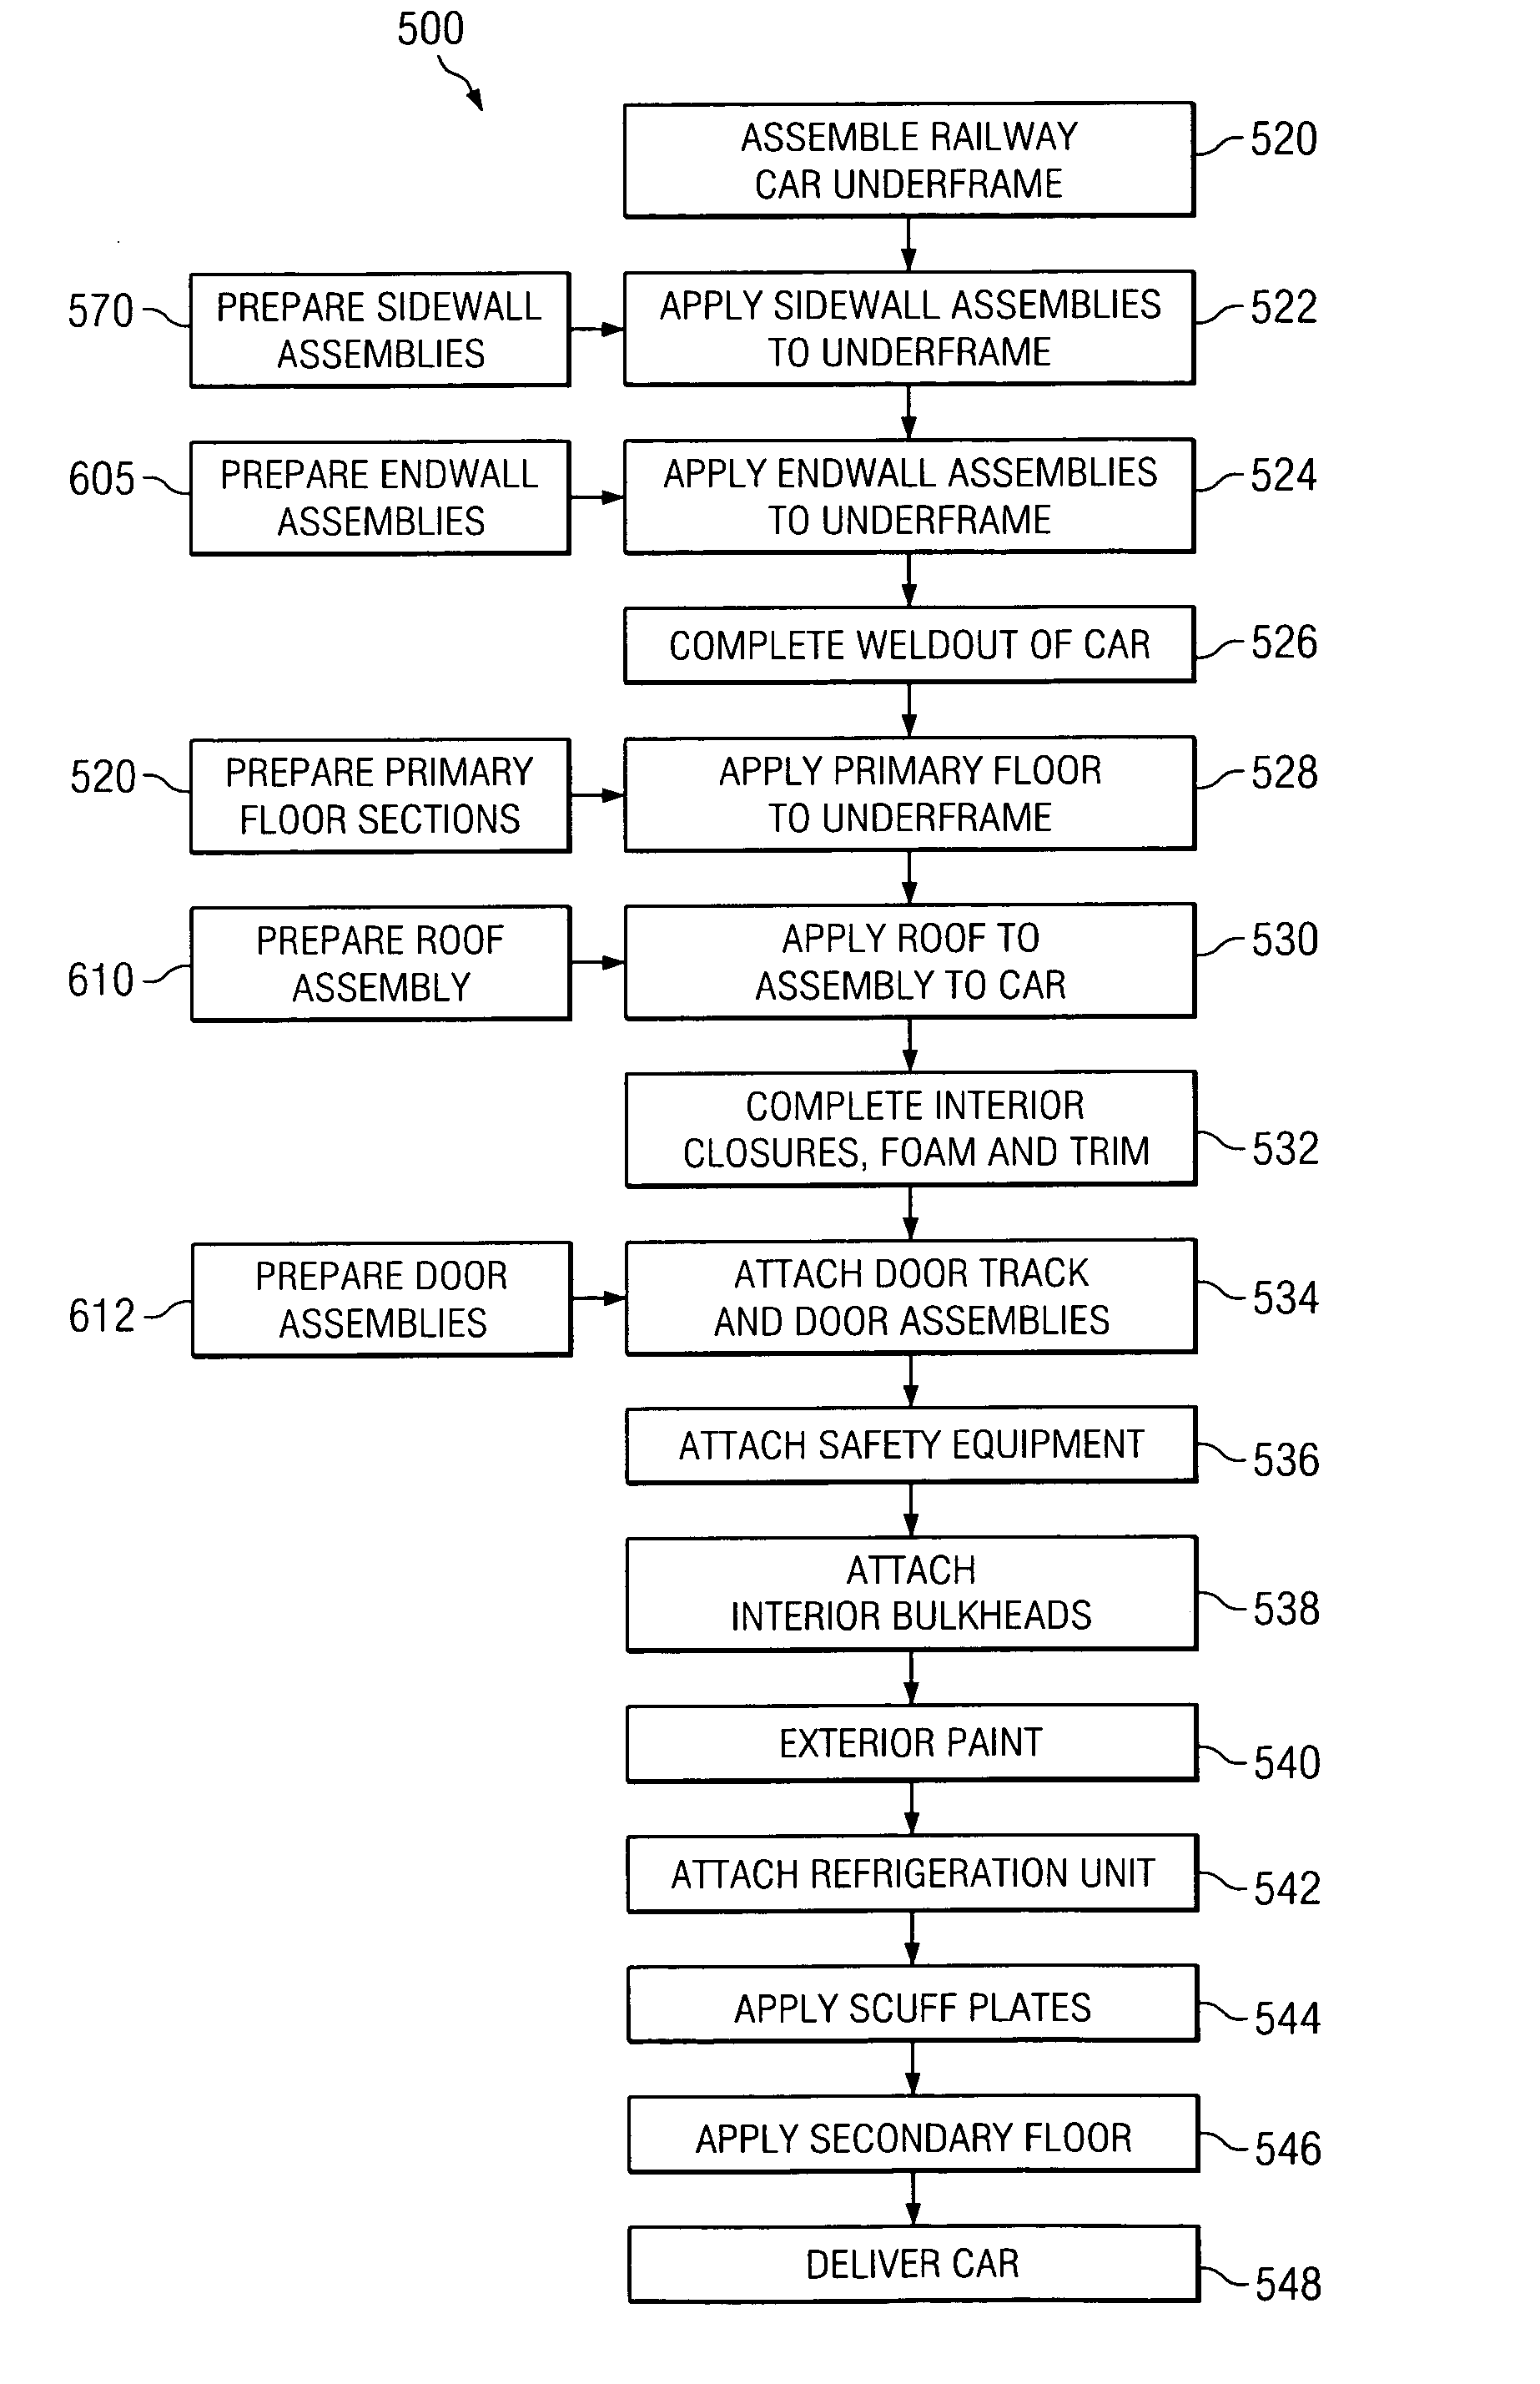 Manufacturing facility and method of assembling a temperature controlled railway car